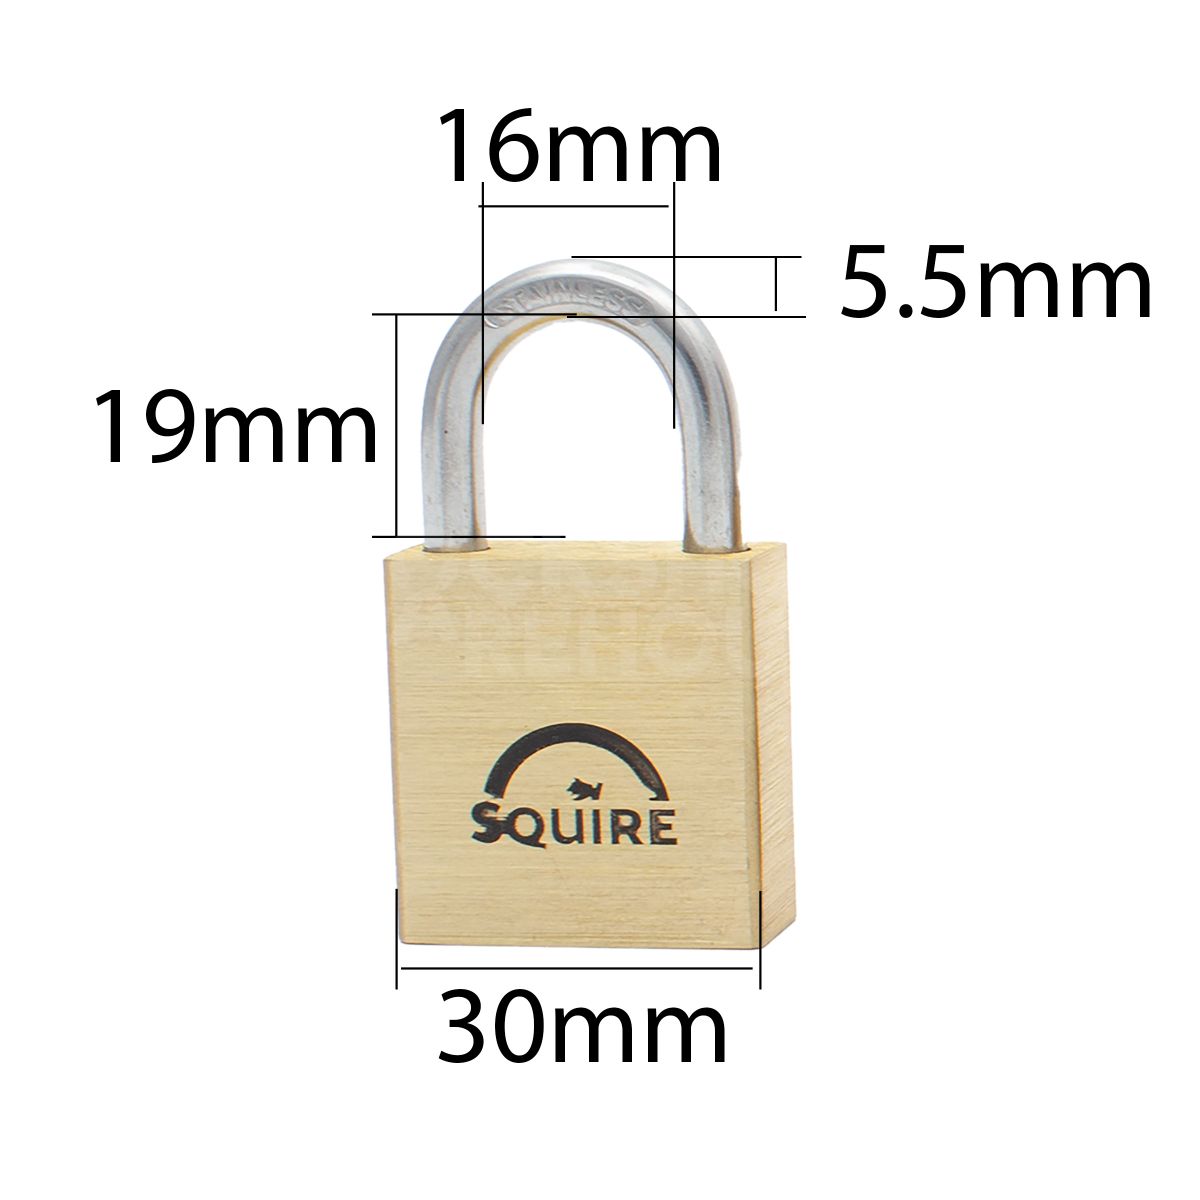 Dimensions Image: Squire LN3S MARINE - 30mm - Brass Padlock Stainless Steel Shackle